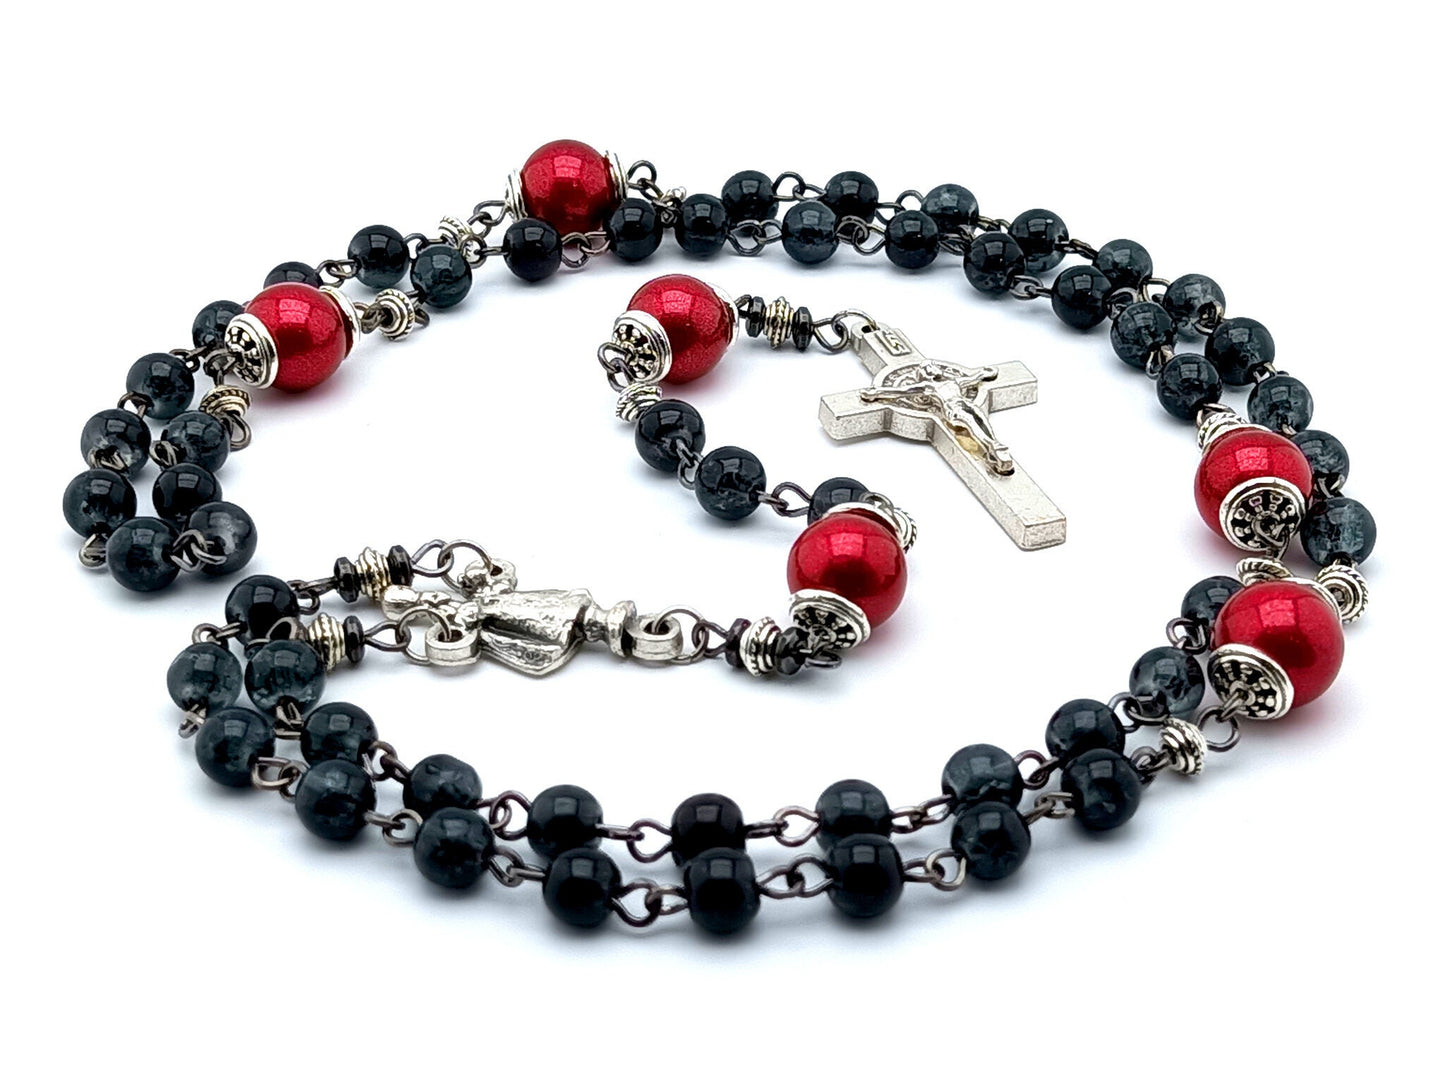 Infant of Prague unique rosary beads with black and red glass beads, silver Saint Benedict crucifix and centre medal.